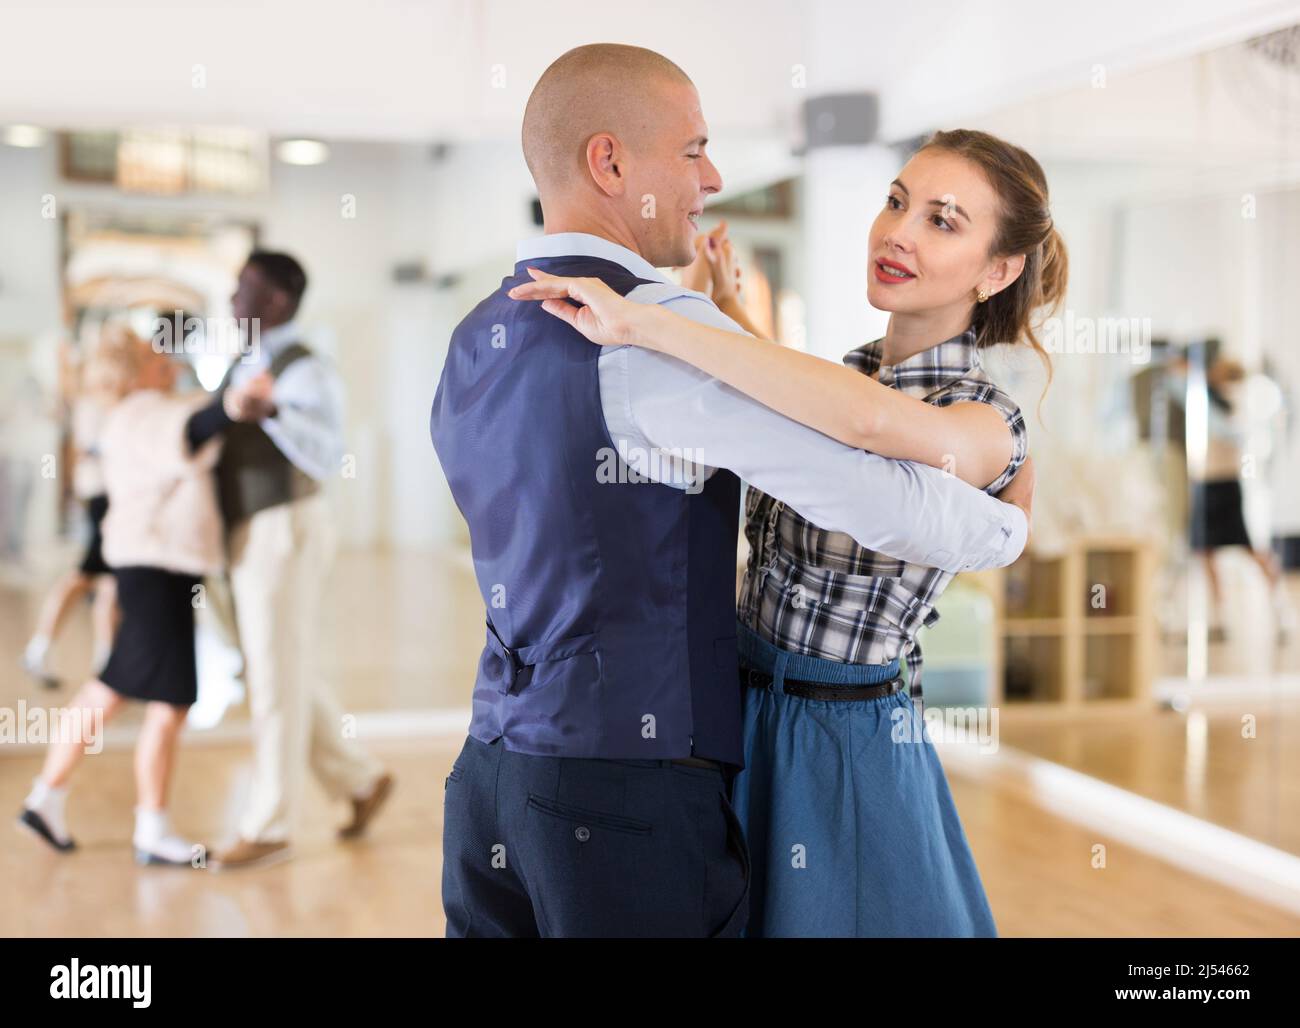 Man and woman learning to dance classical ballroom dance Stock Photo